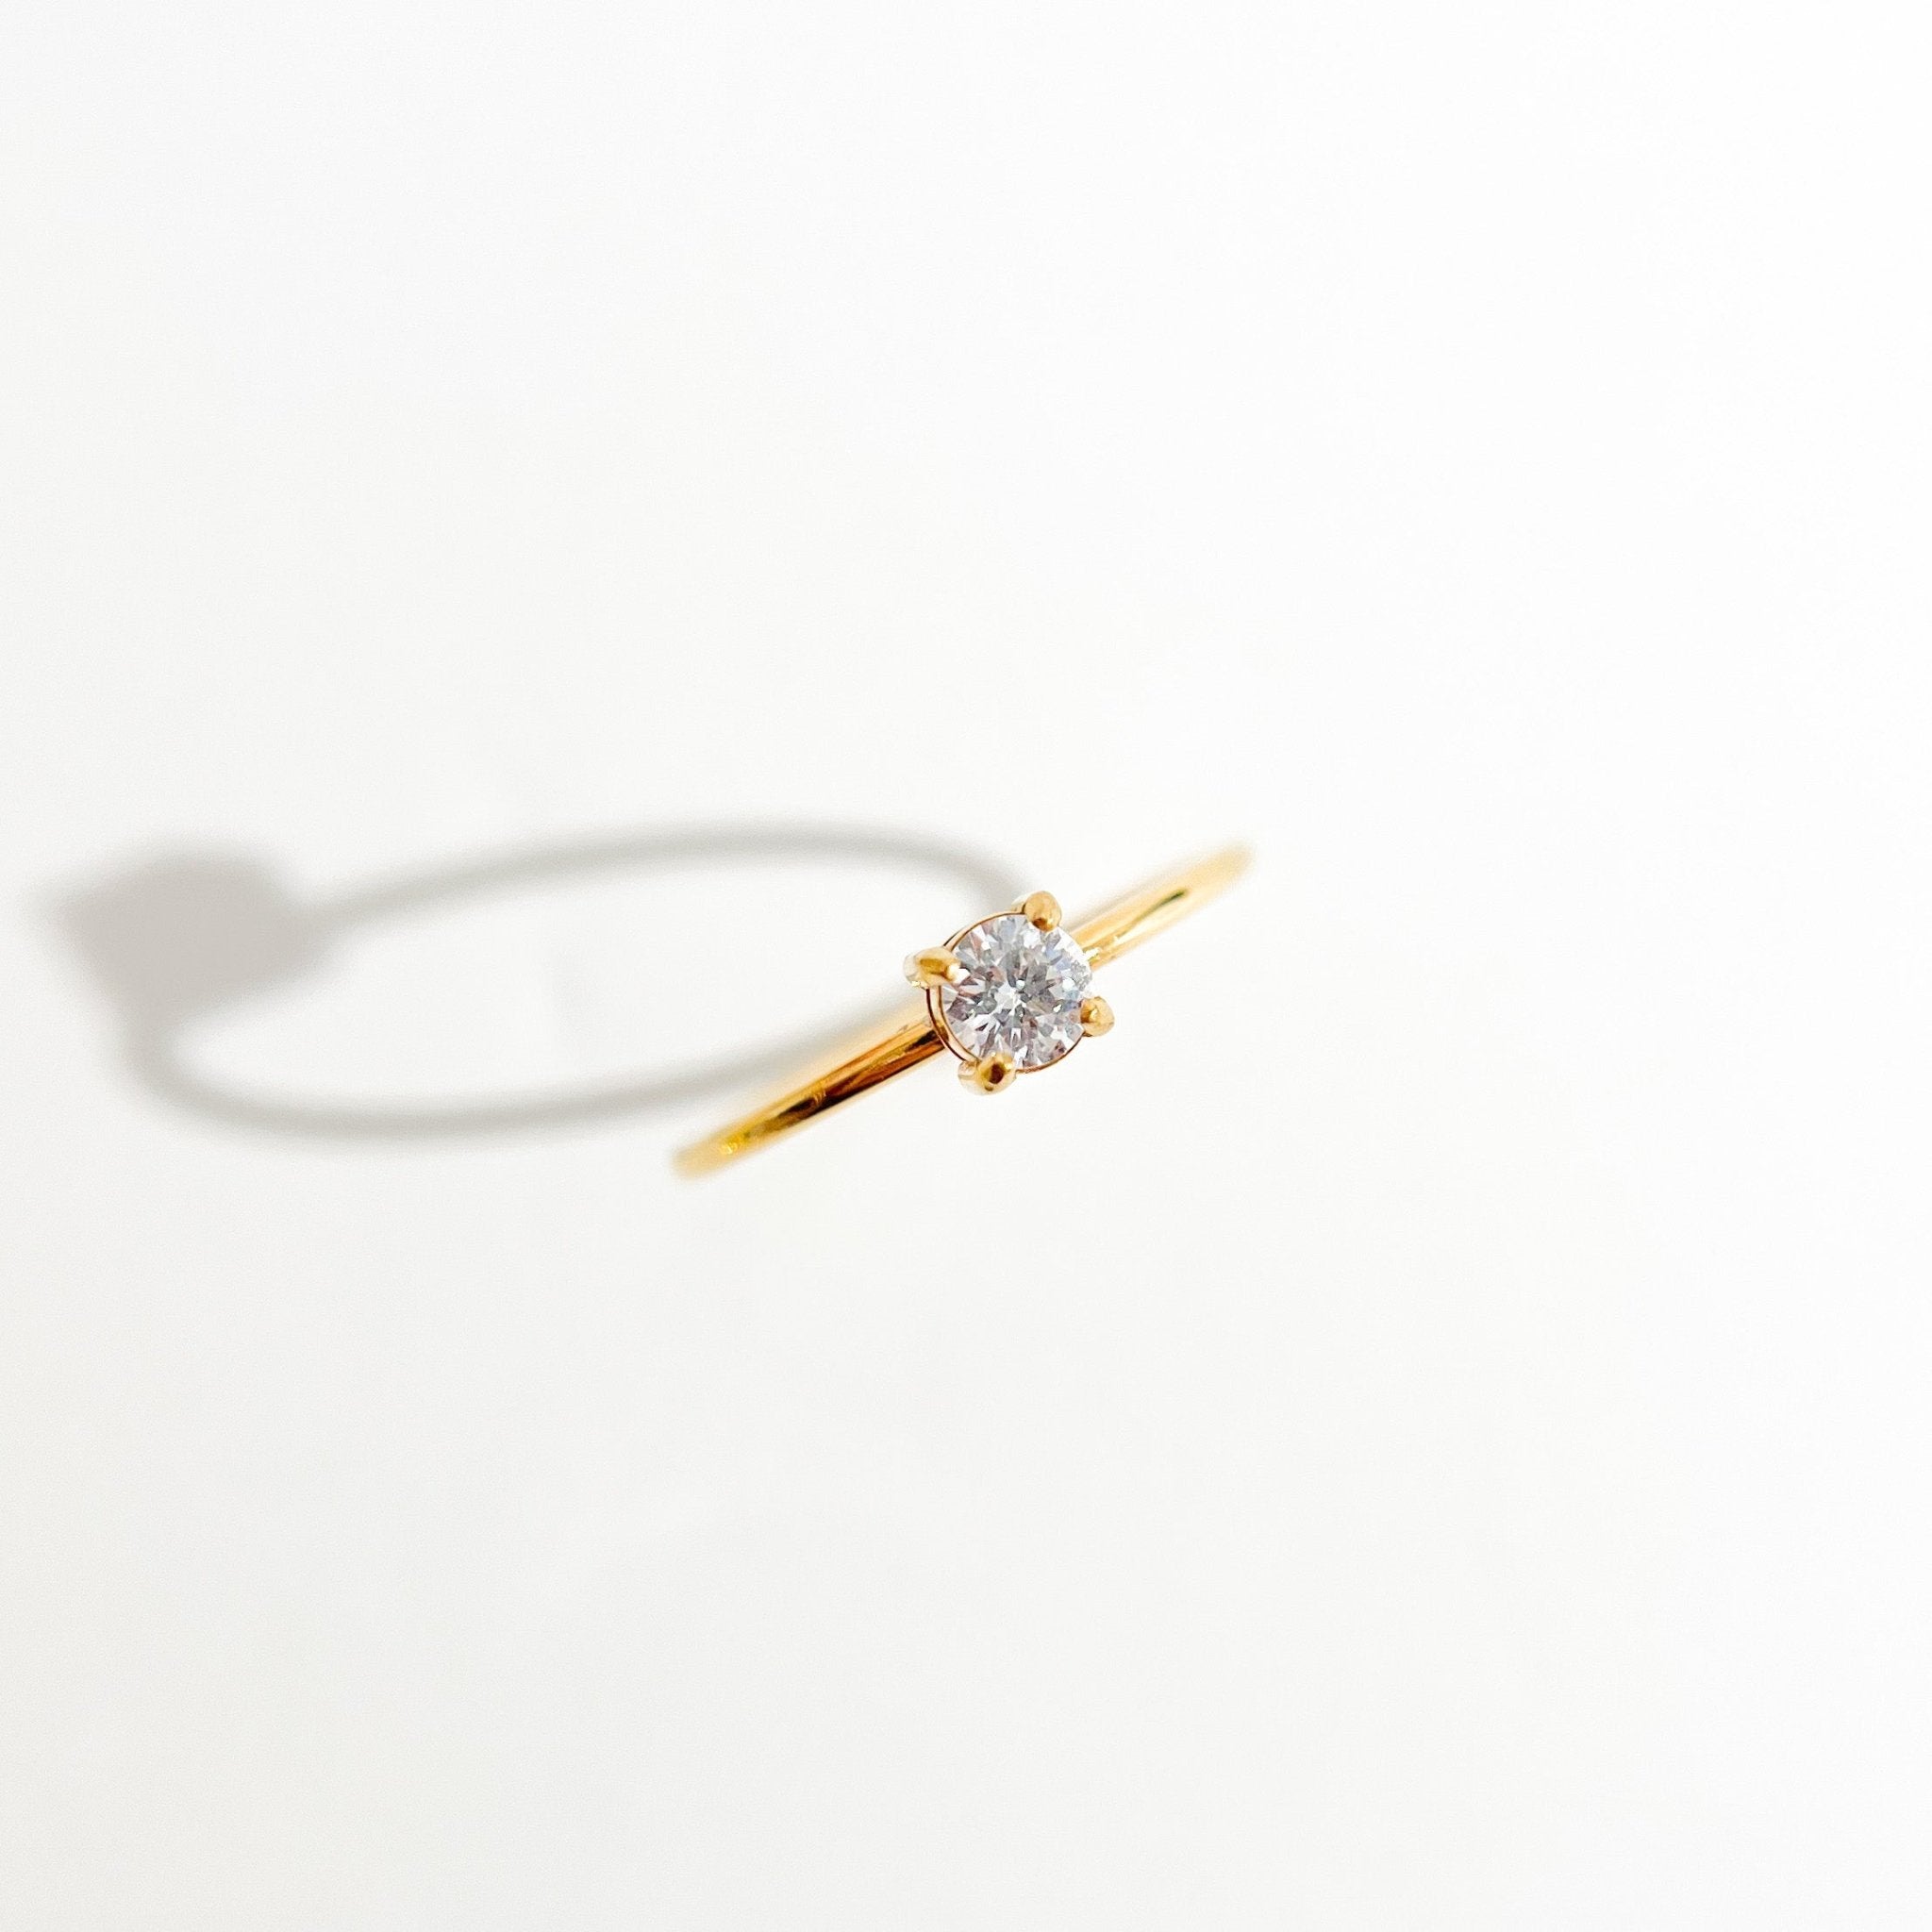 Single Gem 2.0 Ring in Gold - Flaire & Co.